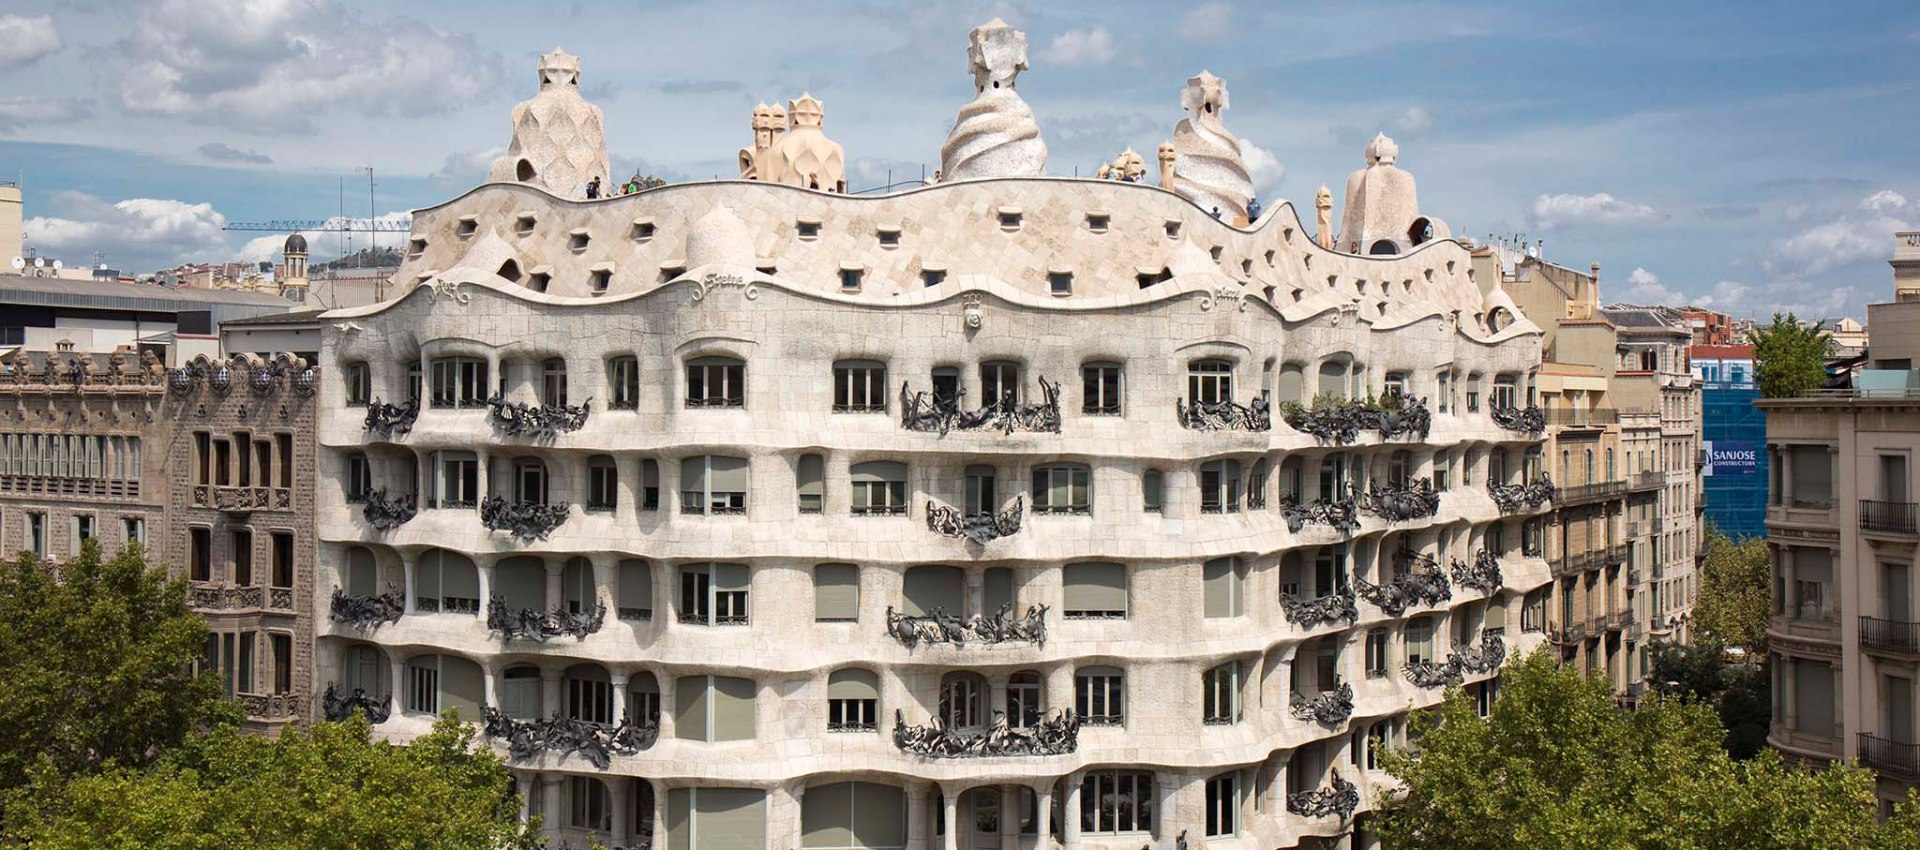 siete y media Plantación Crónica Milá House. La pedrera by Antoni Gaudí, one of the most emblematic  buildings in Barcelona | The Strength of Architecture | From 1998